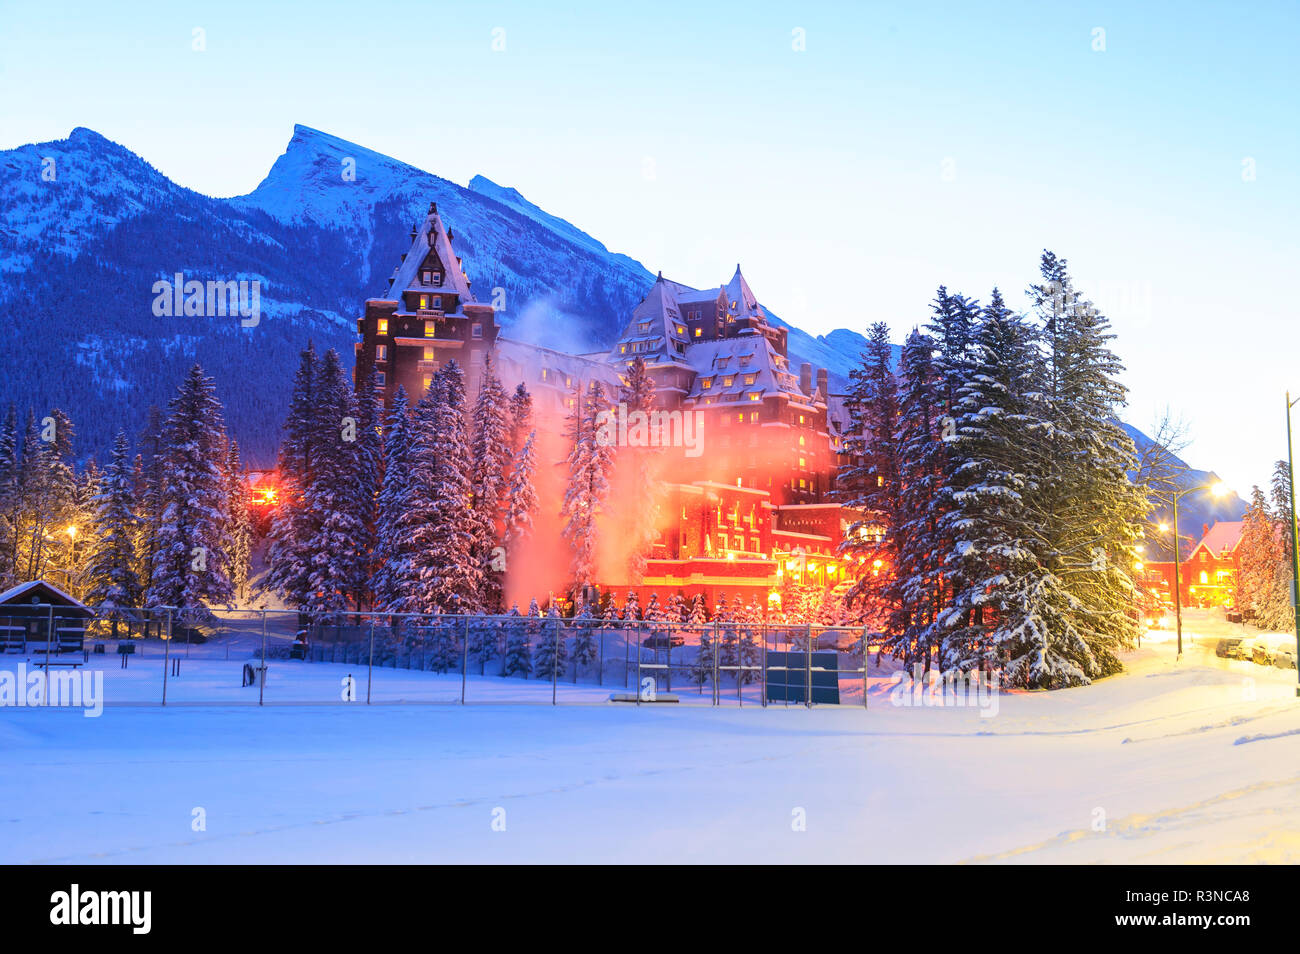 Early Winter Morning View Of Fairmont Banff Springs Hotel Near Town Of Banff Canadian Rockies Alberta Canada Stock Photo Alamy